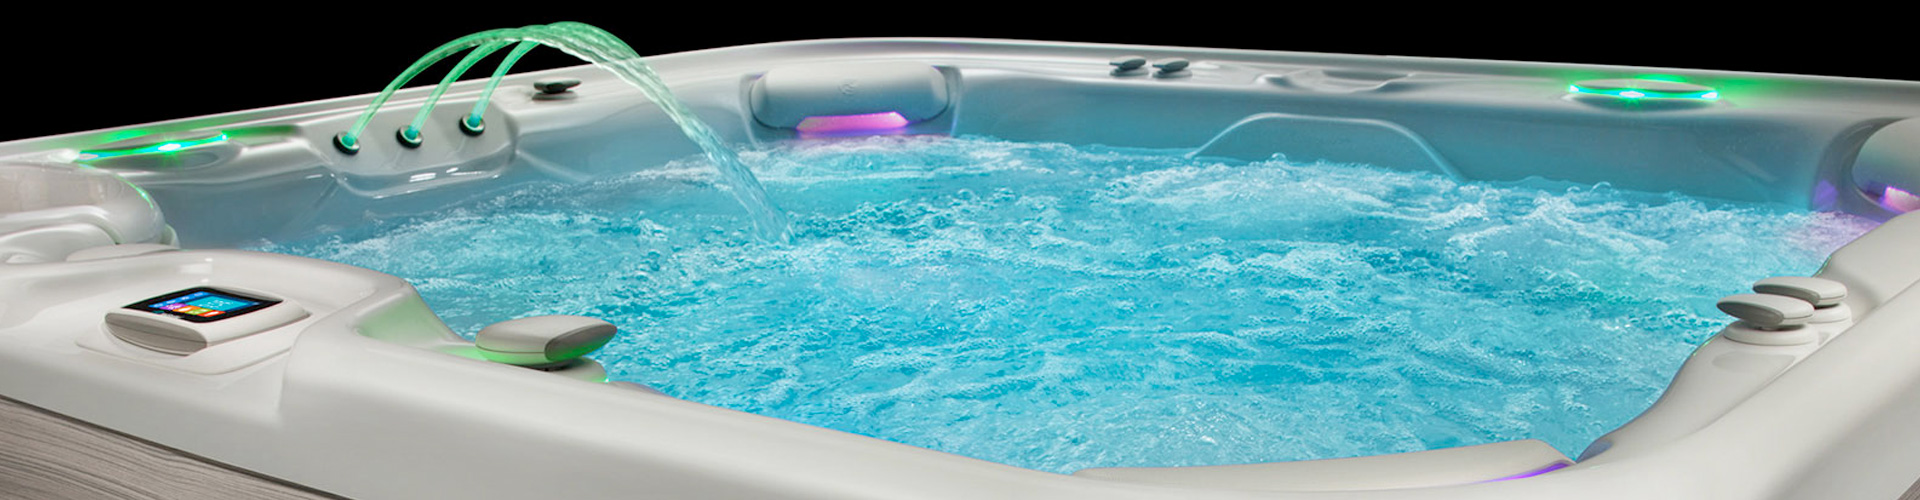 USED HOT TUBS